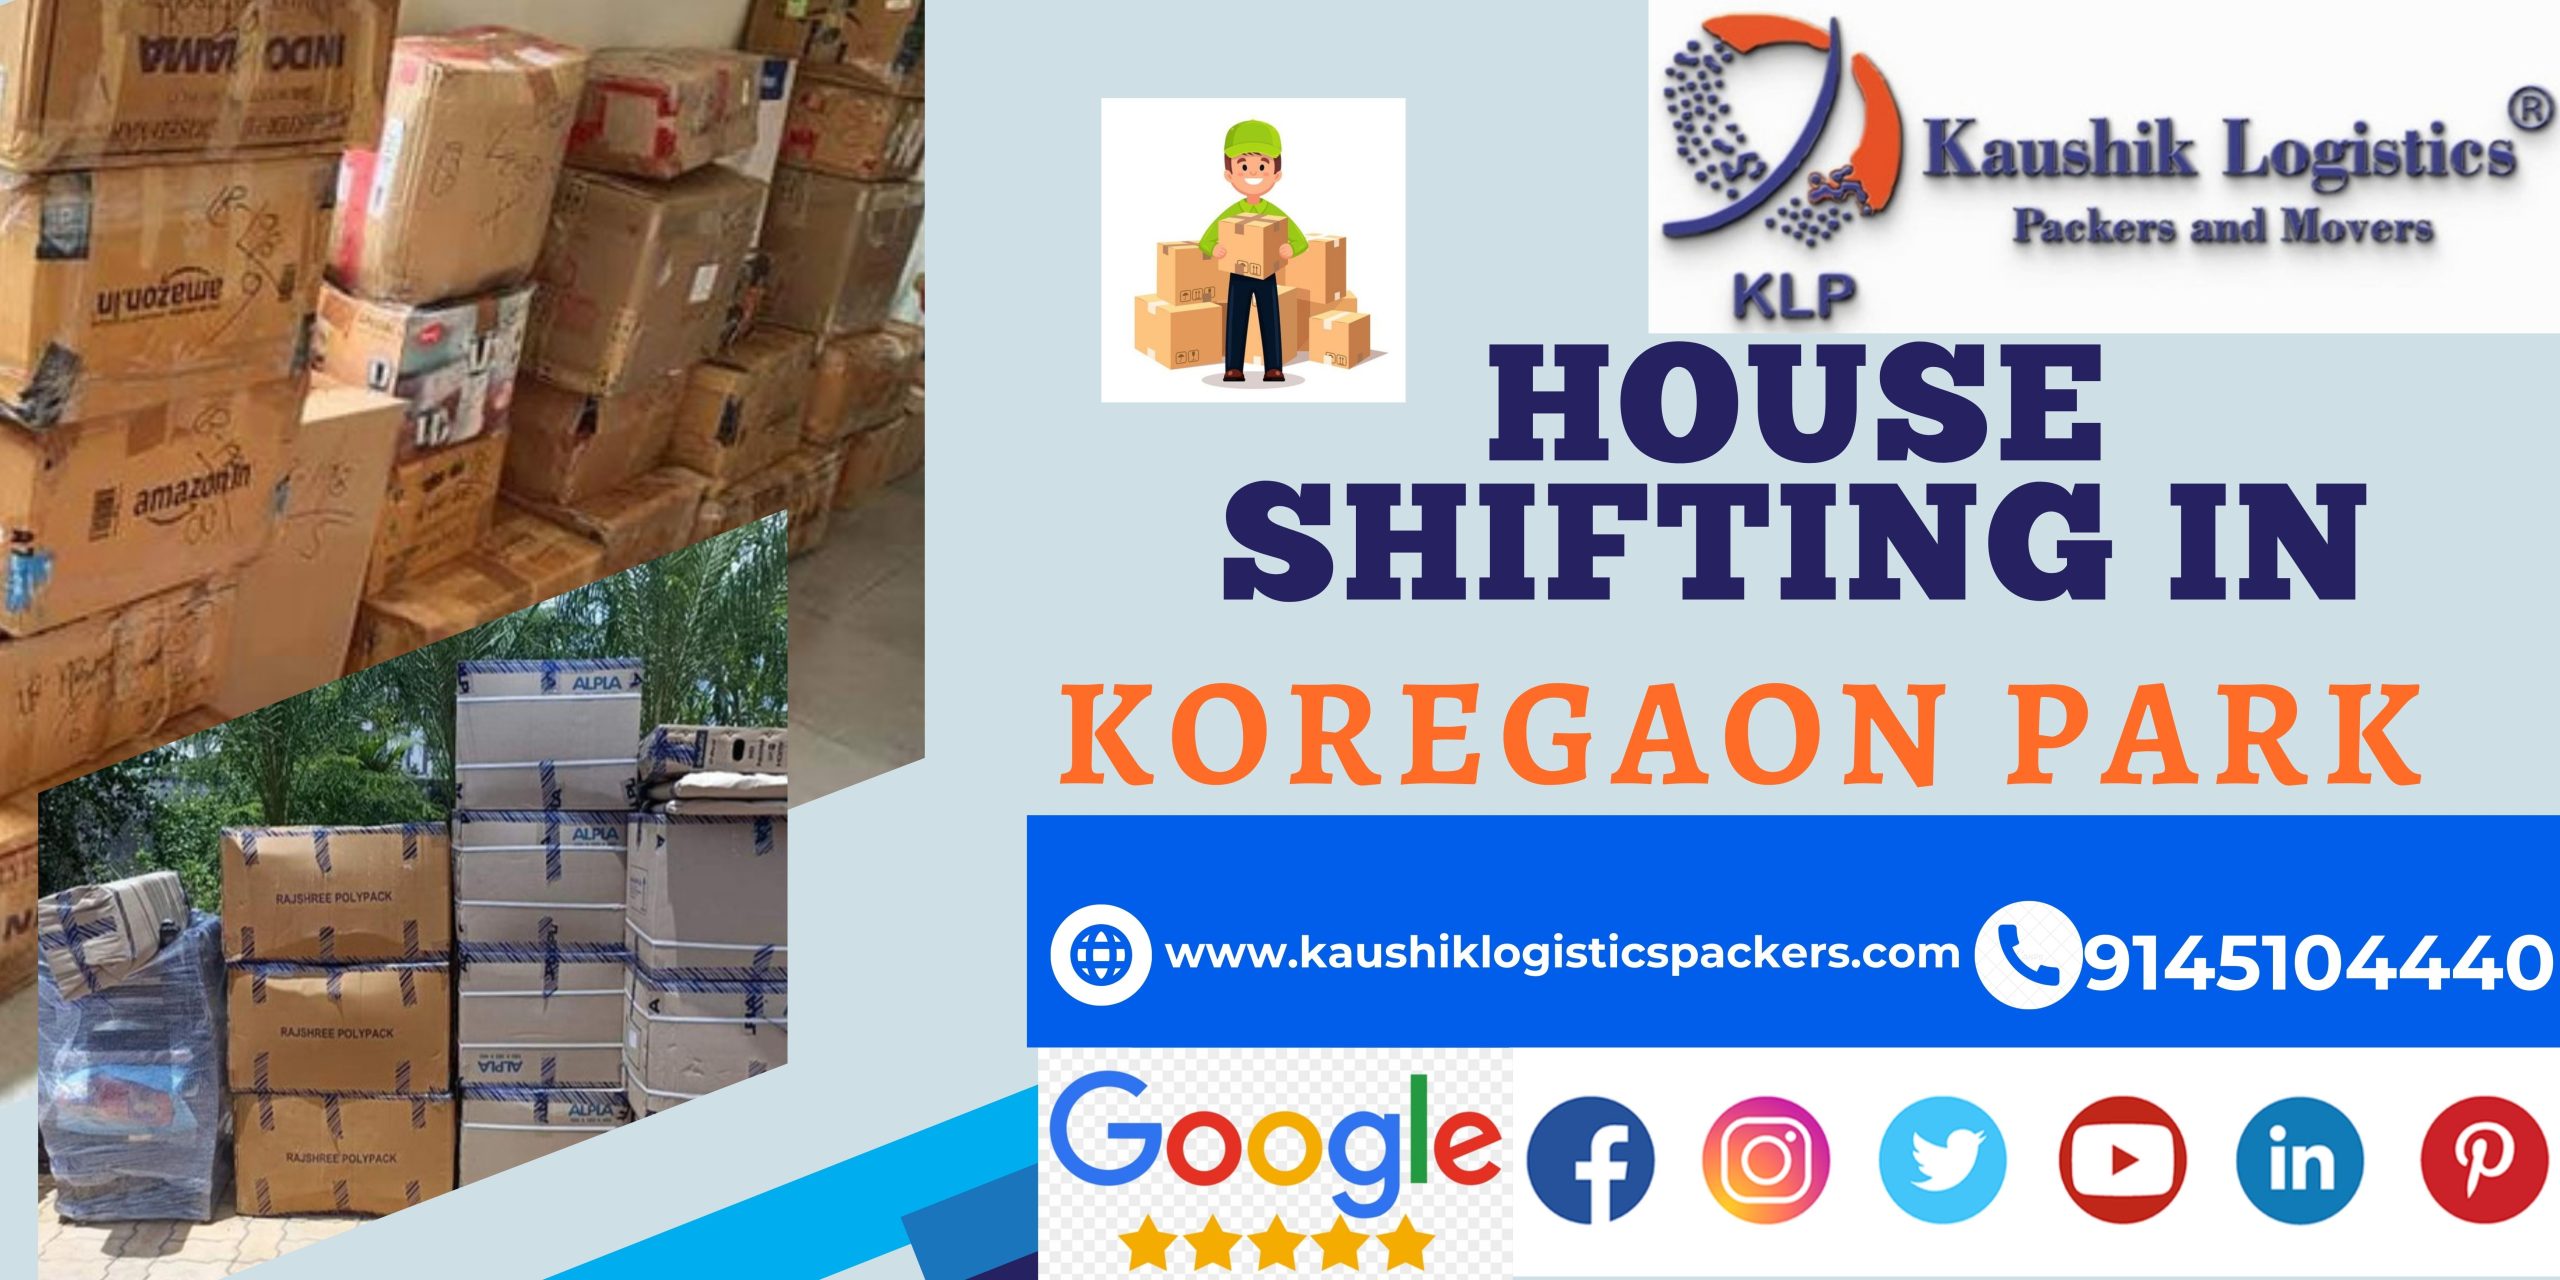 Packers and Movers In Koregaon Park